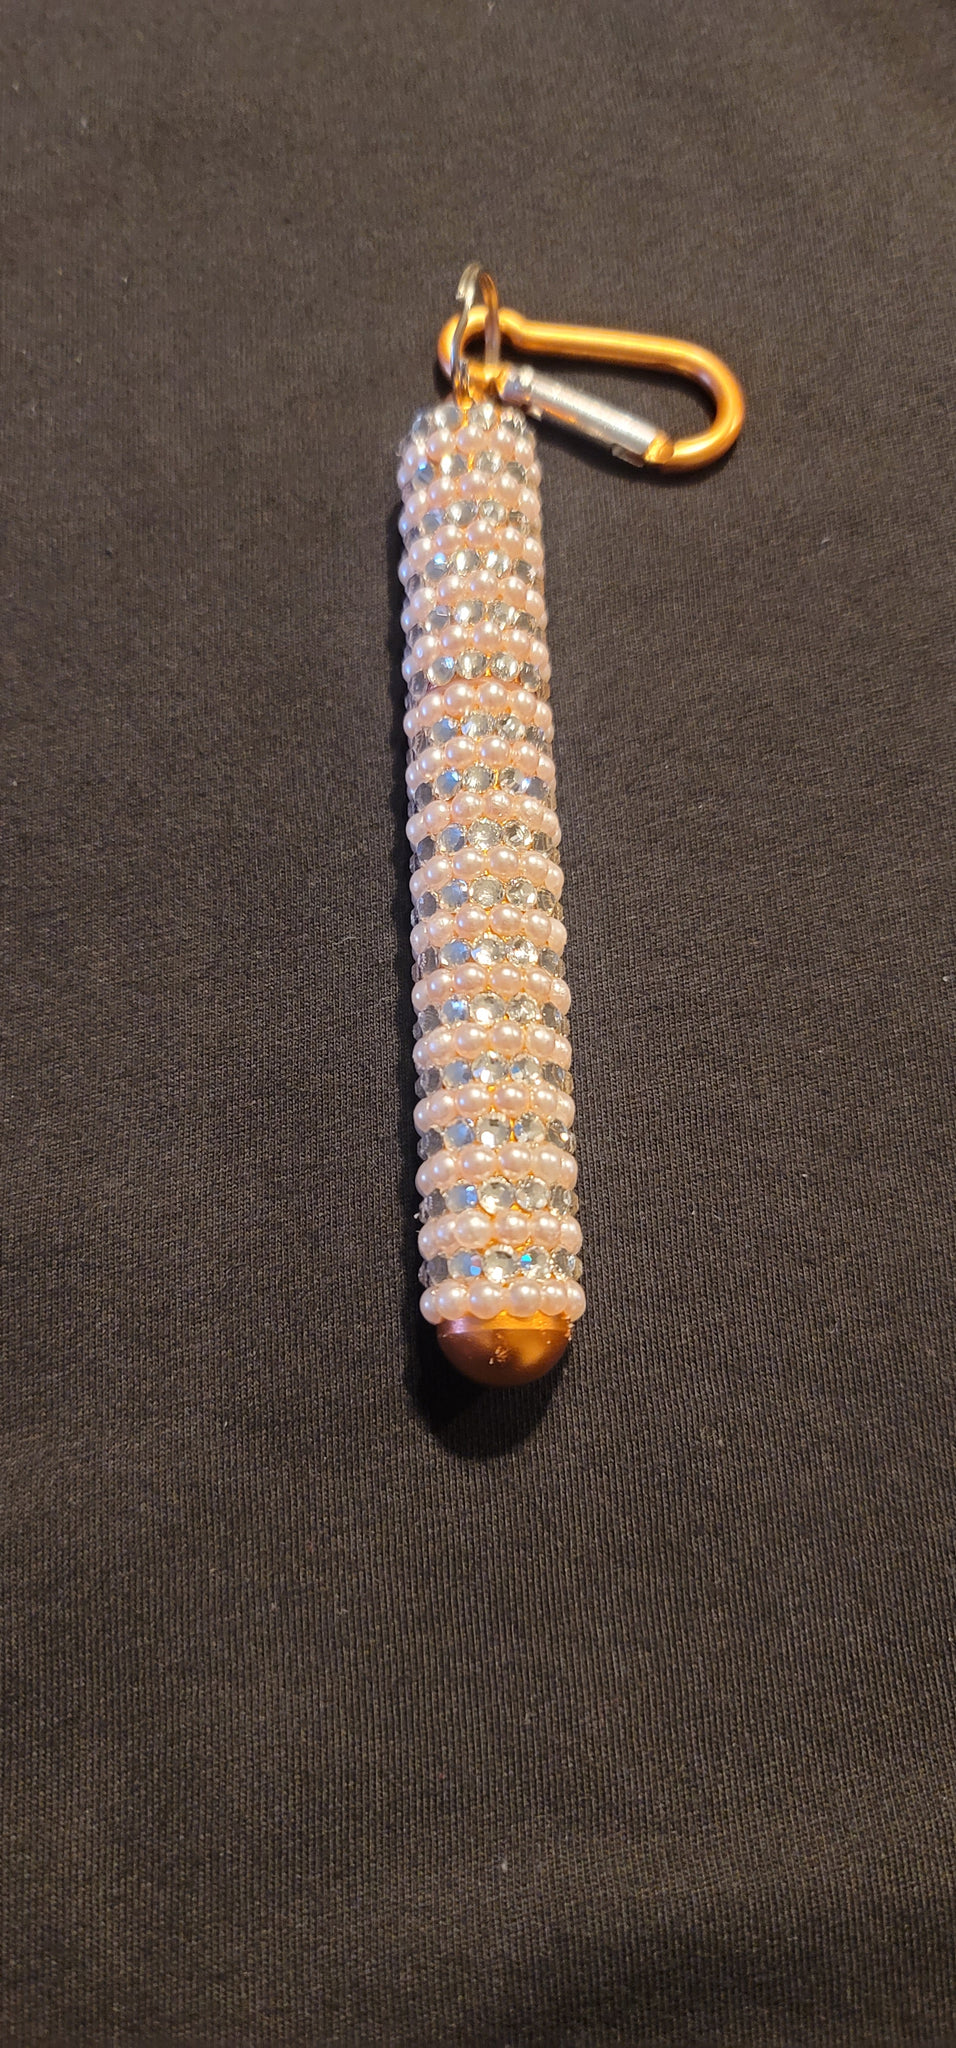 Personal Reusable Straw - Pearl and Crystal Rhinestone with Copper Colored Accents